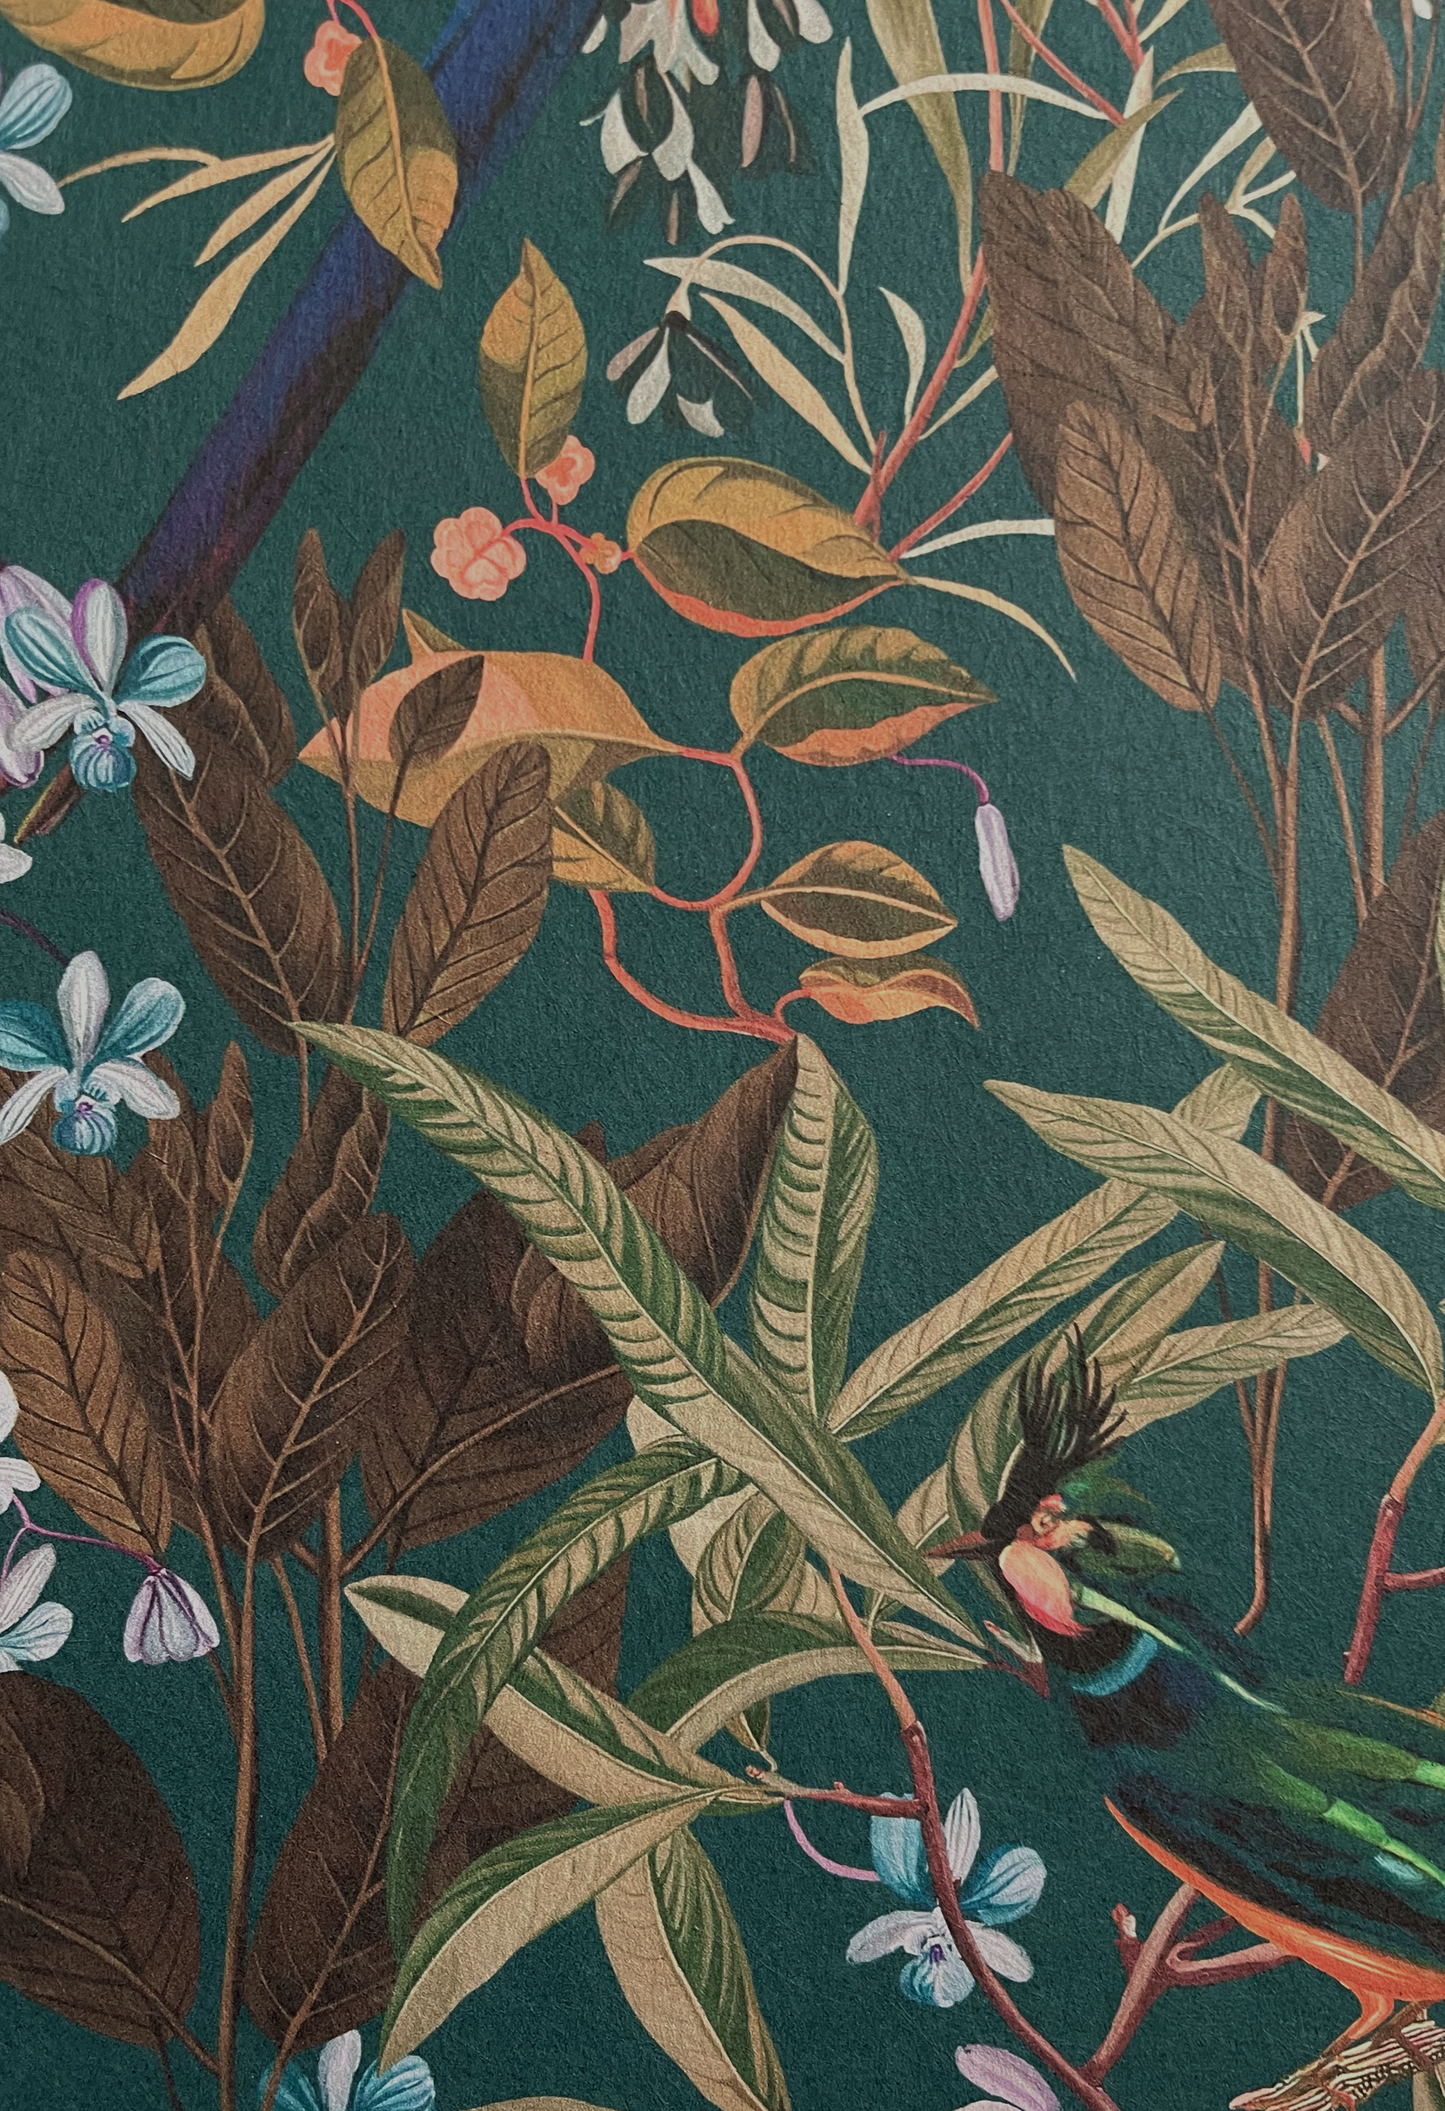 close up of botanical leaves, flowers and a tropical bird on green dark background by Deus ex Gardenia of Resplendent Woods textured Wallpaper in Forest.